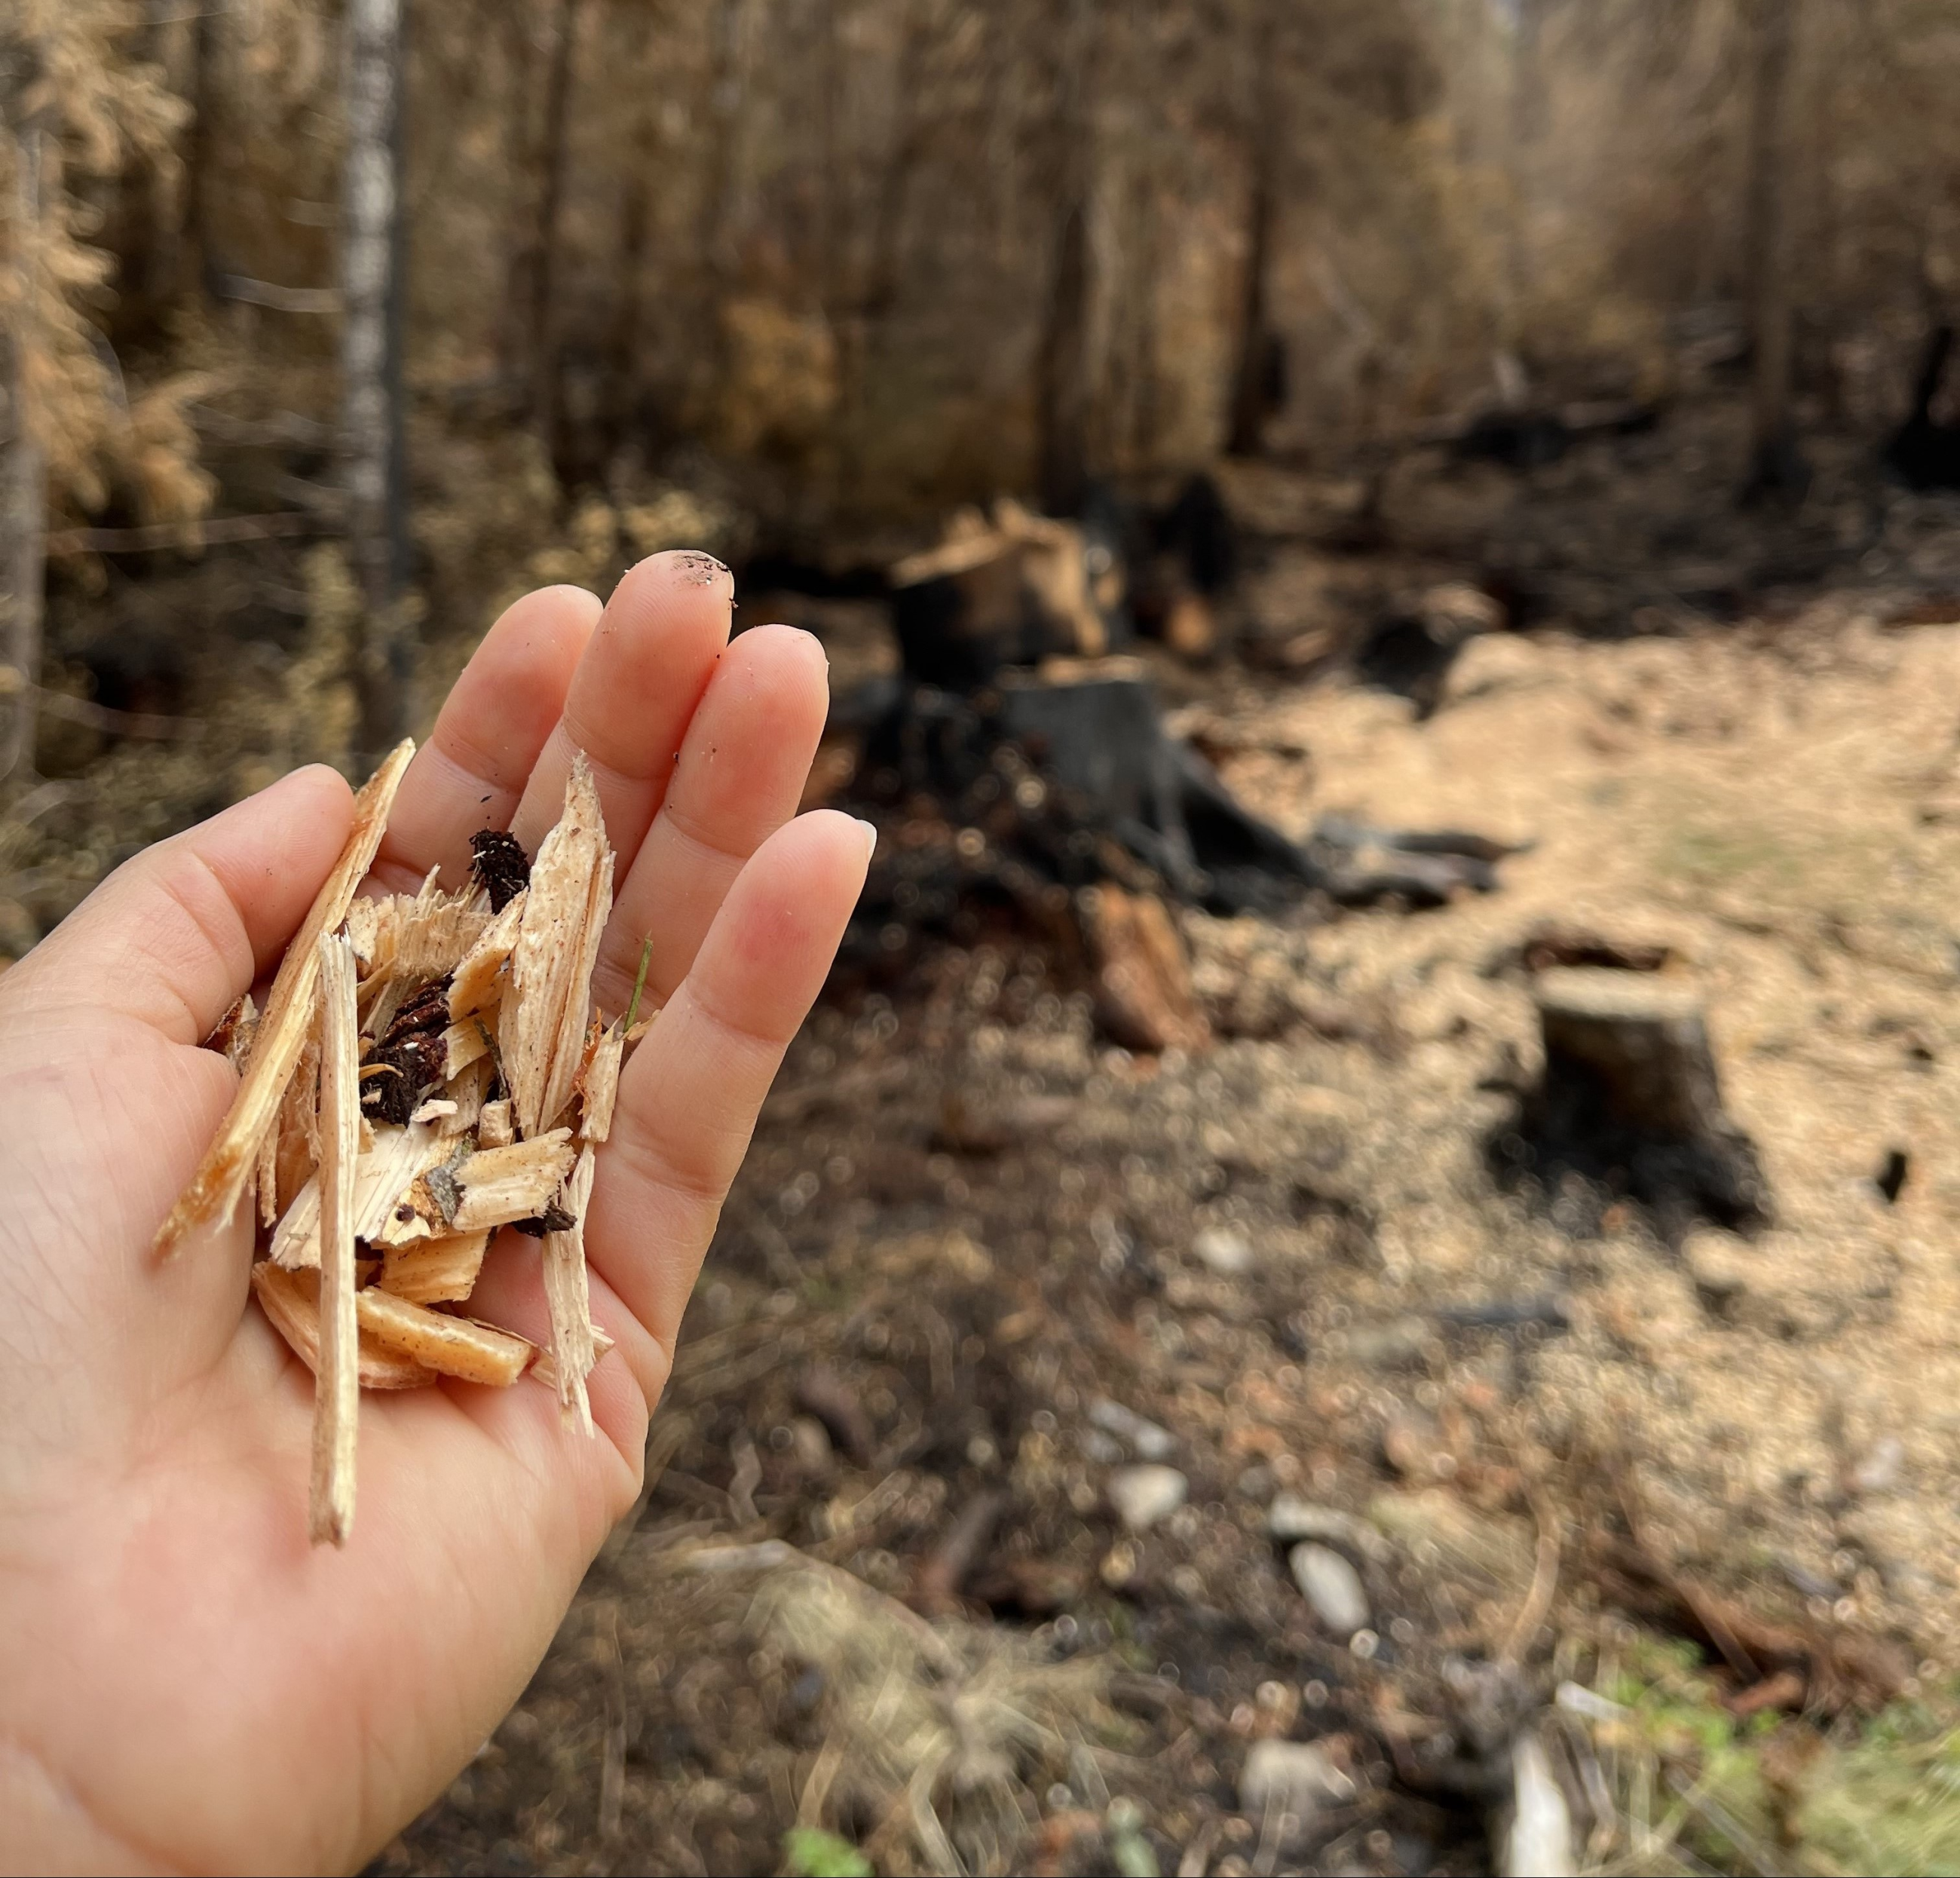 a handful of chipped woody debris, with chips dispersed across the forest floor in the background